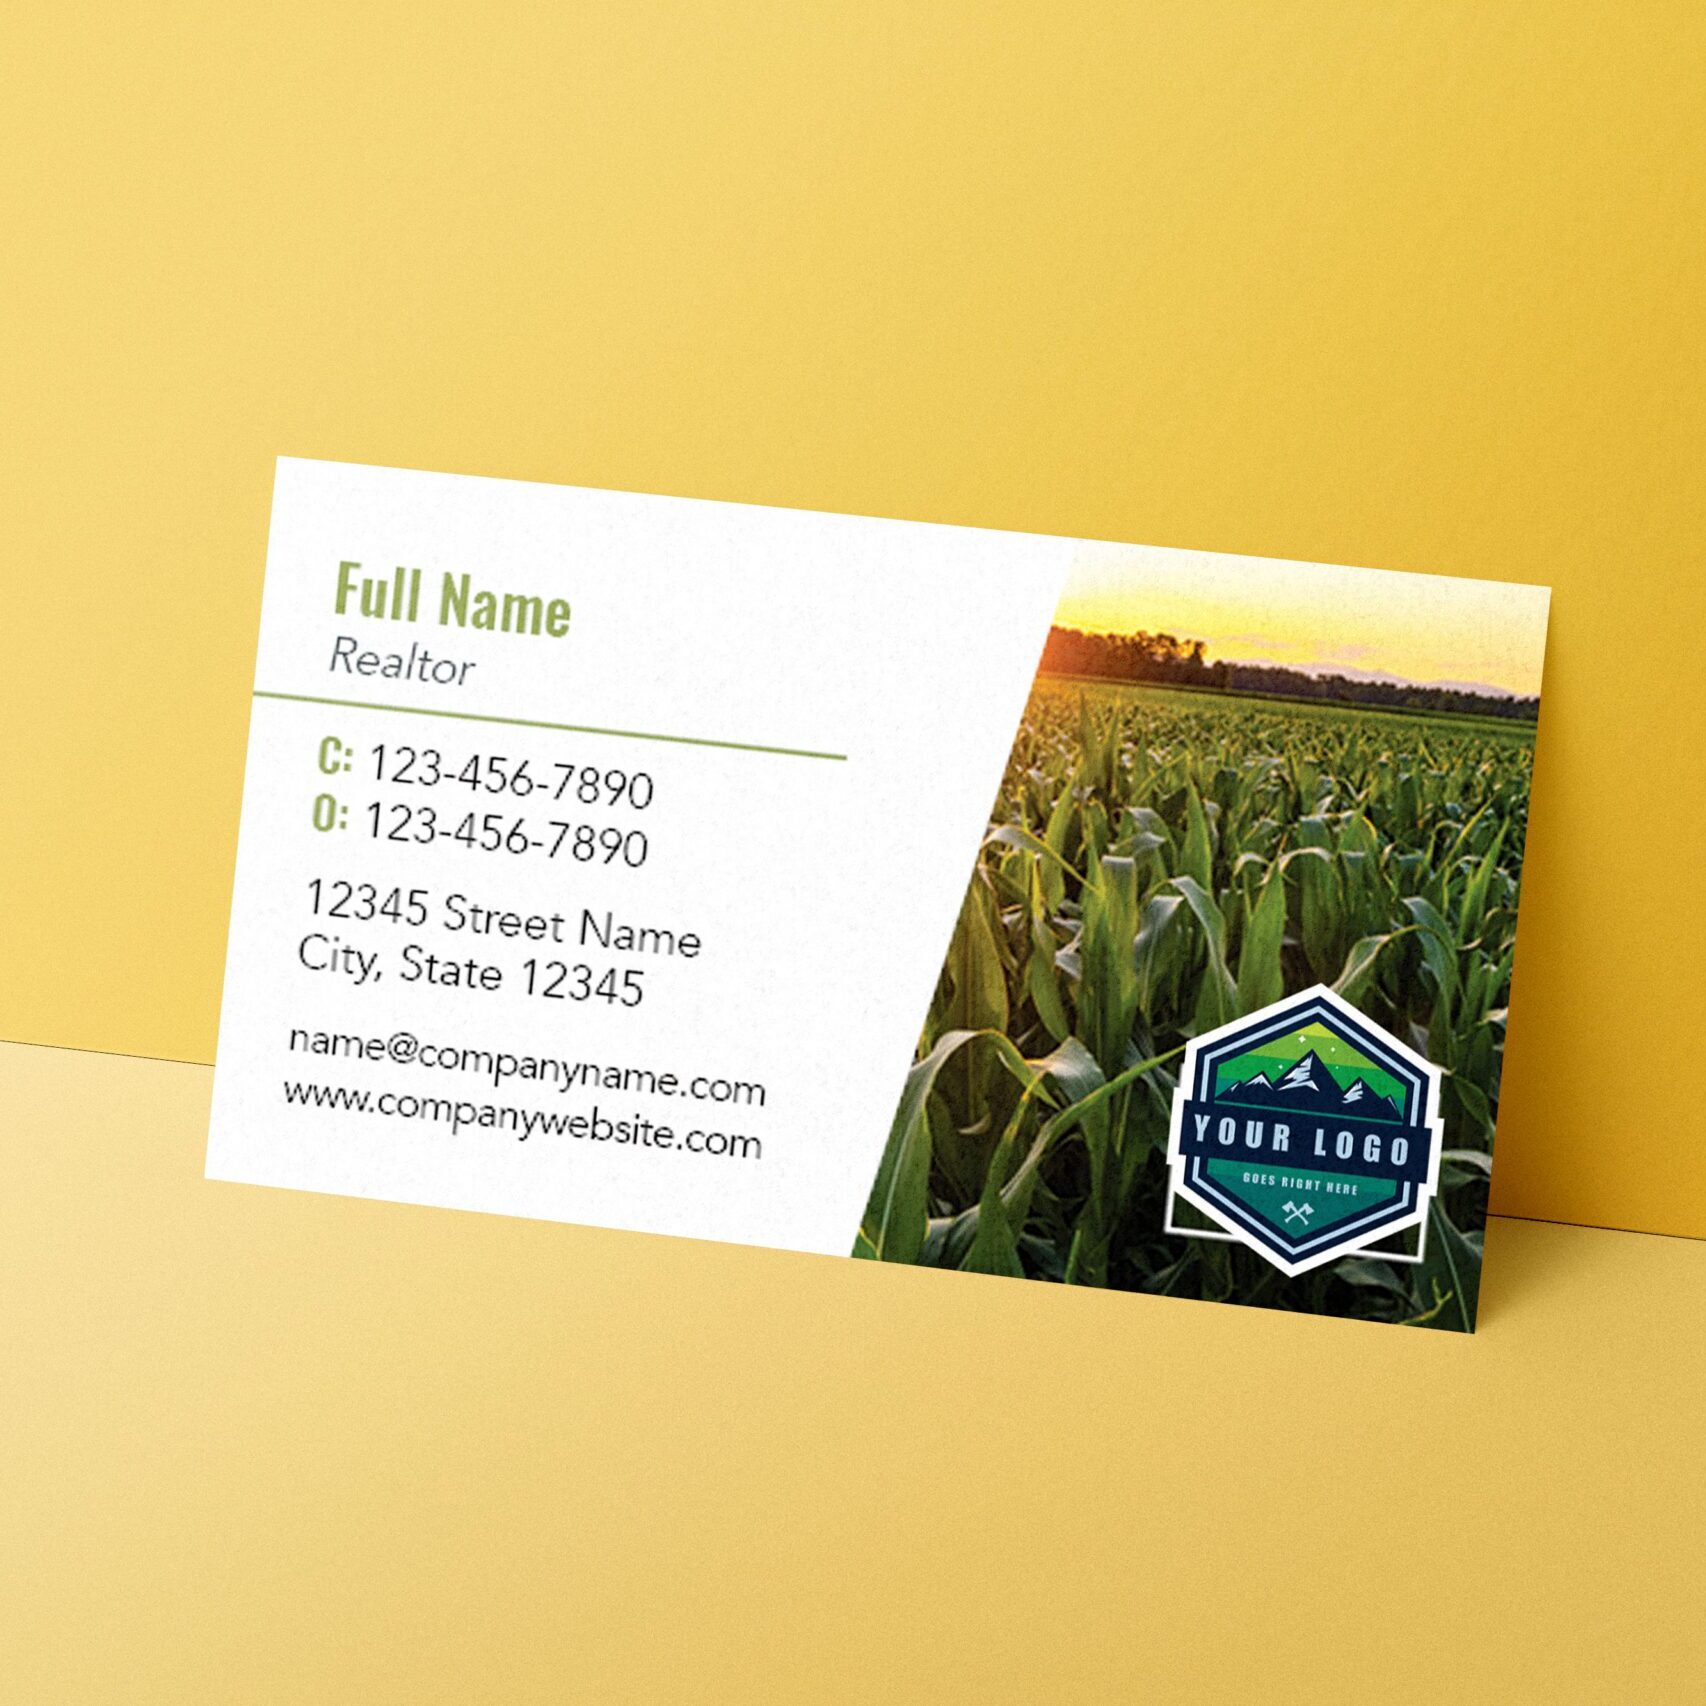 Business Card Design for Land Sales Professional